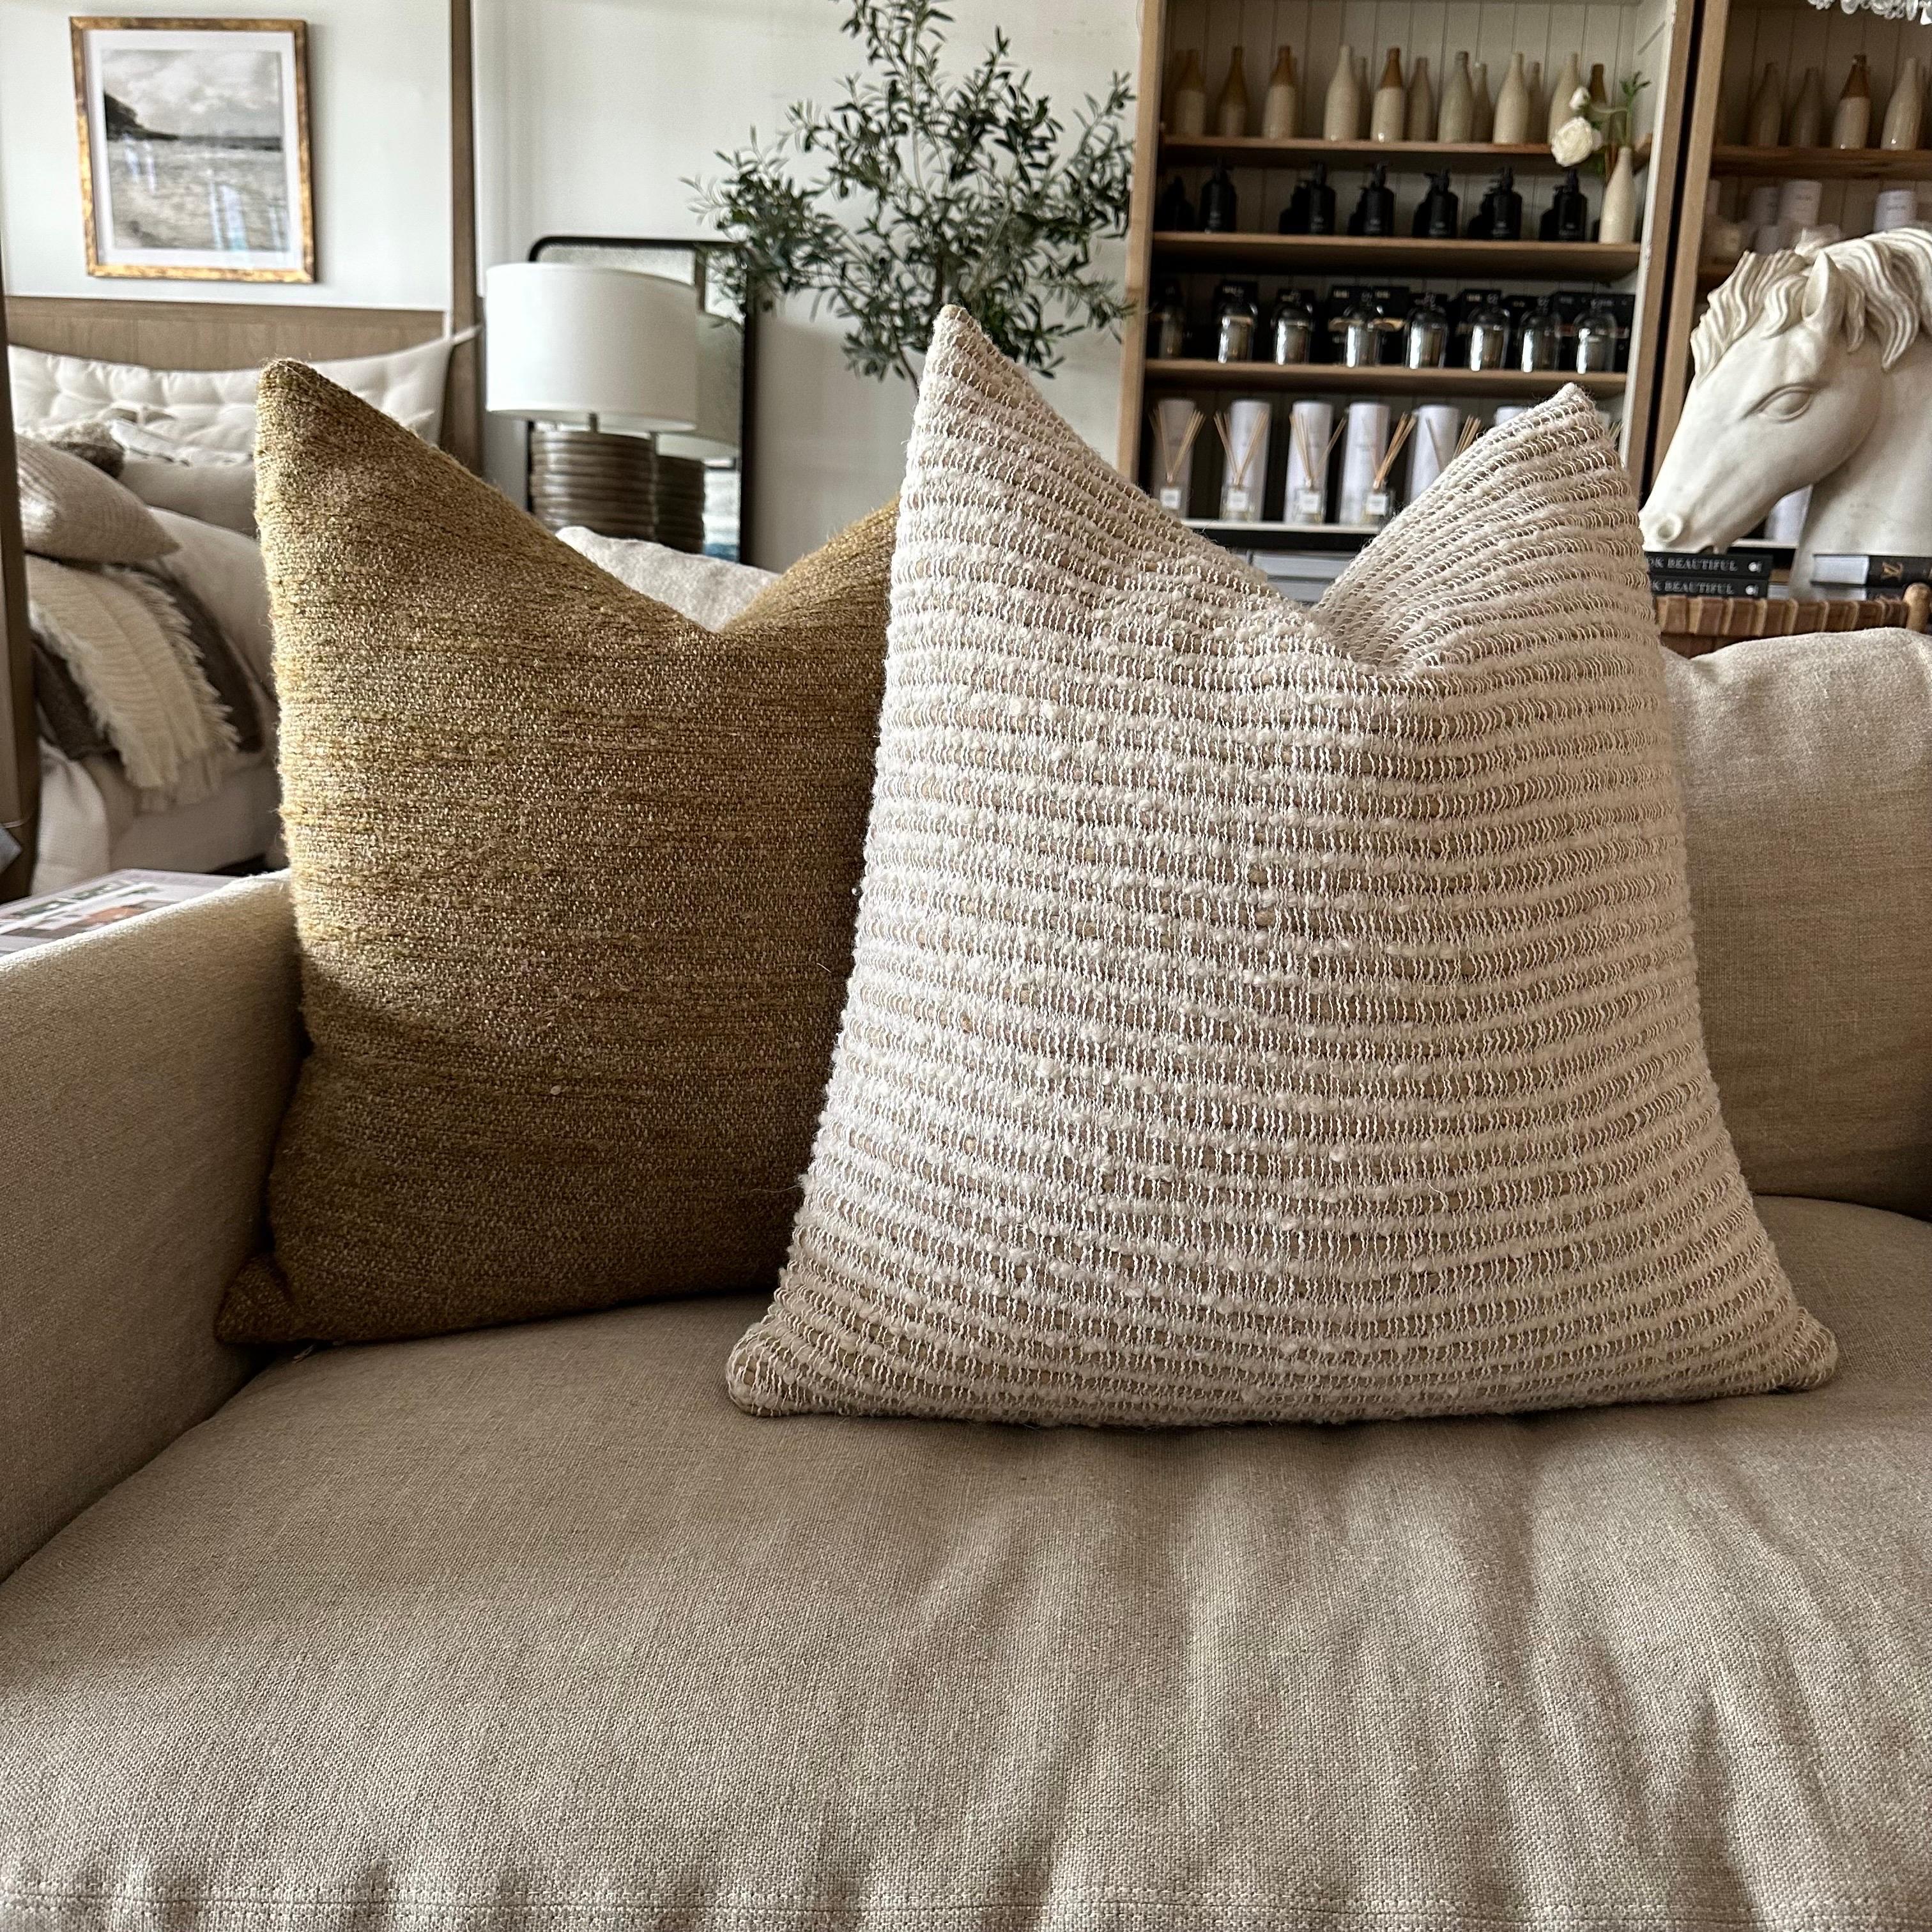 Woven in Belgium using traditional weaving techniques, Sandra pillow features a soft chunky mixed sheep & Alpaca wool yarn on white linen warp.  If this item is backordered, please allow 2-3 weeks for production.
Includes a down / feather